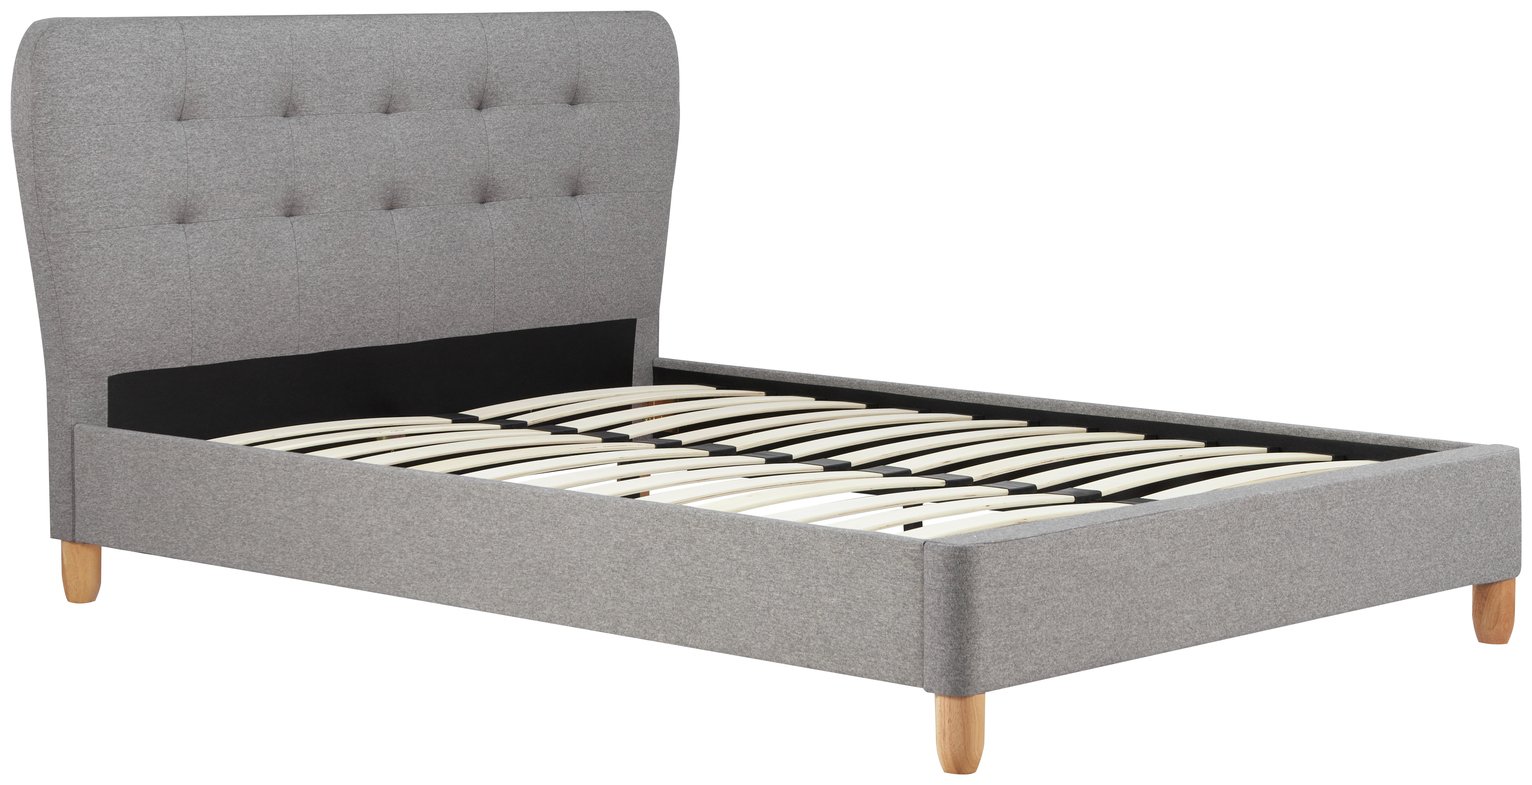 Birlea Stockholm Small Double Bed Frame Review